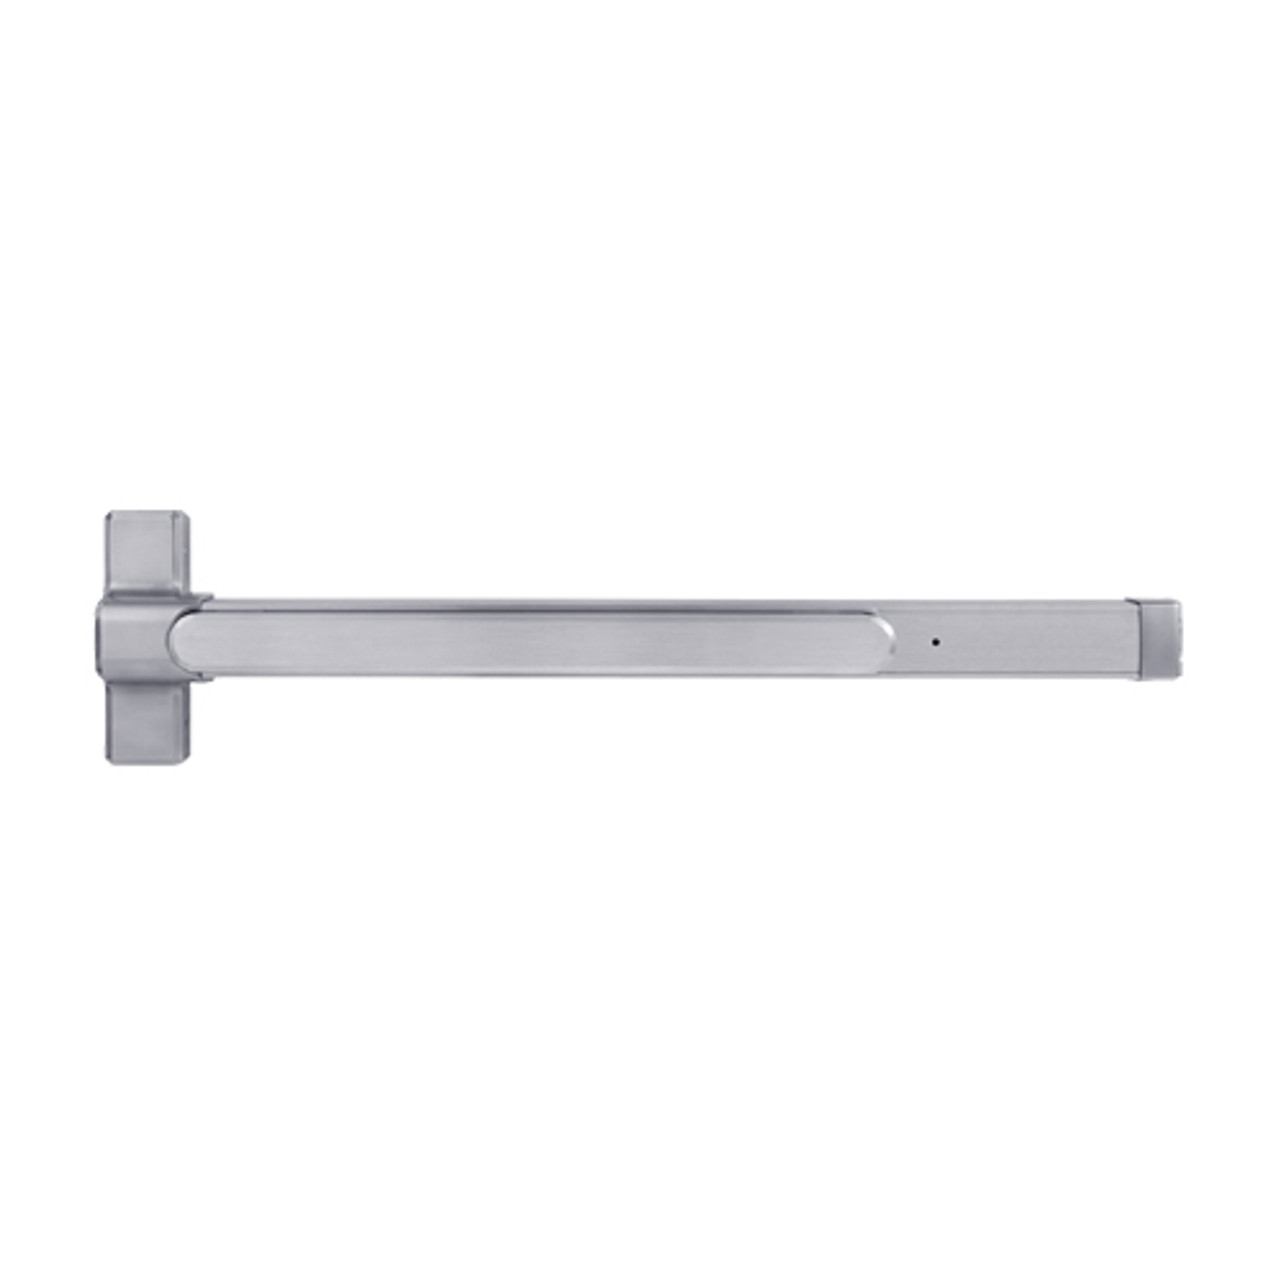 QED129LR-36-7-626 Stanley QED100 Series Heavy Duty Concealed Vertical Rod Fire Rated Exit Device in Satin Chrome Finish